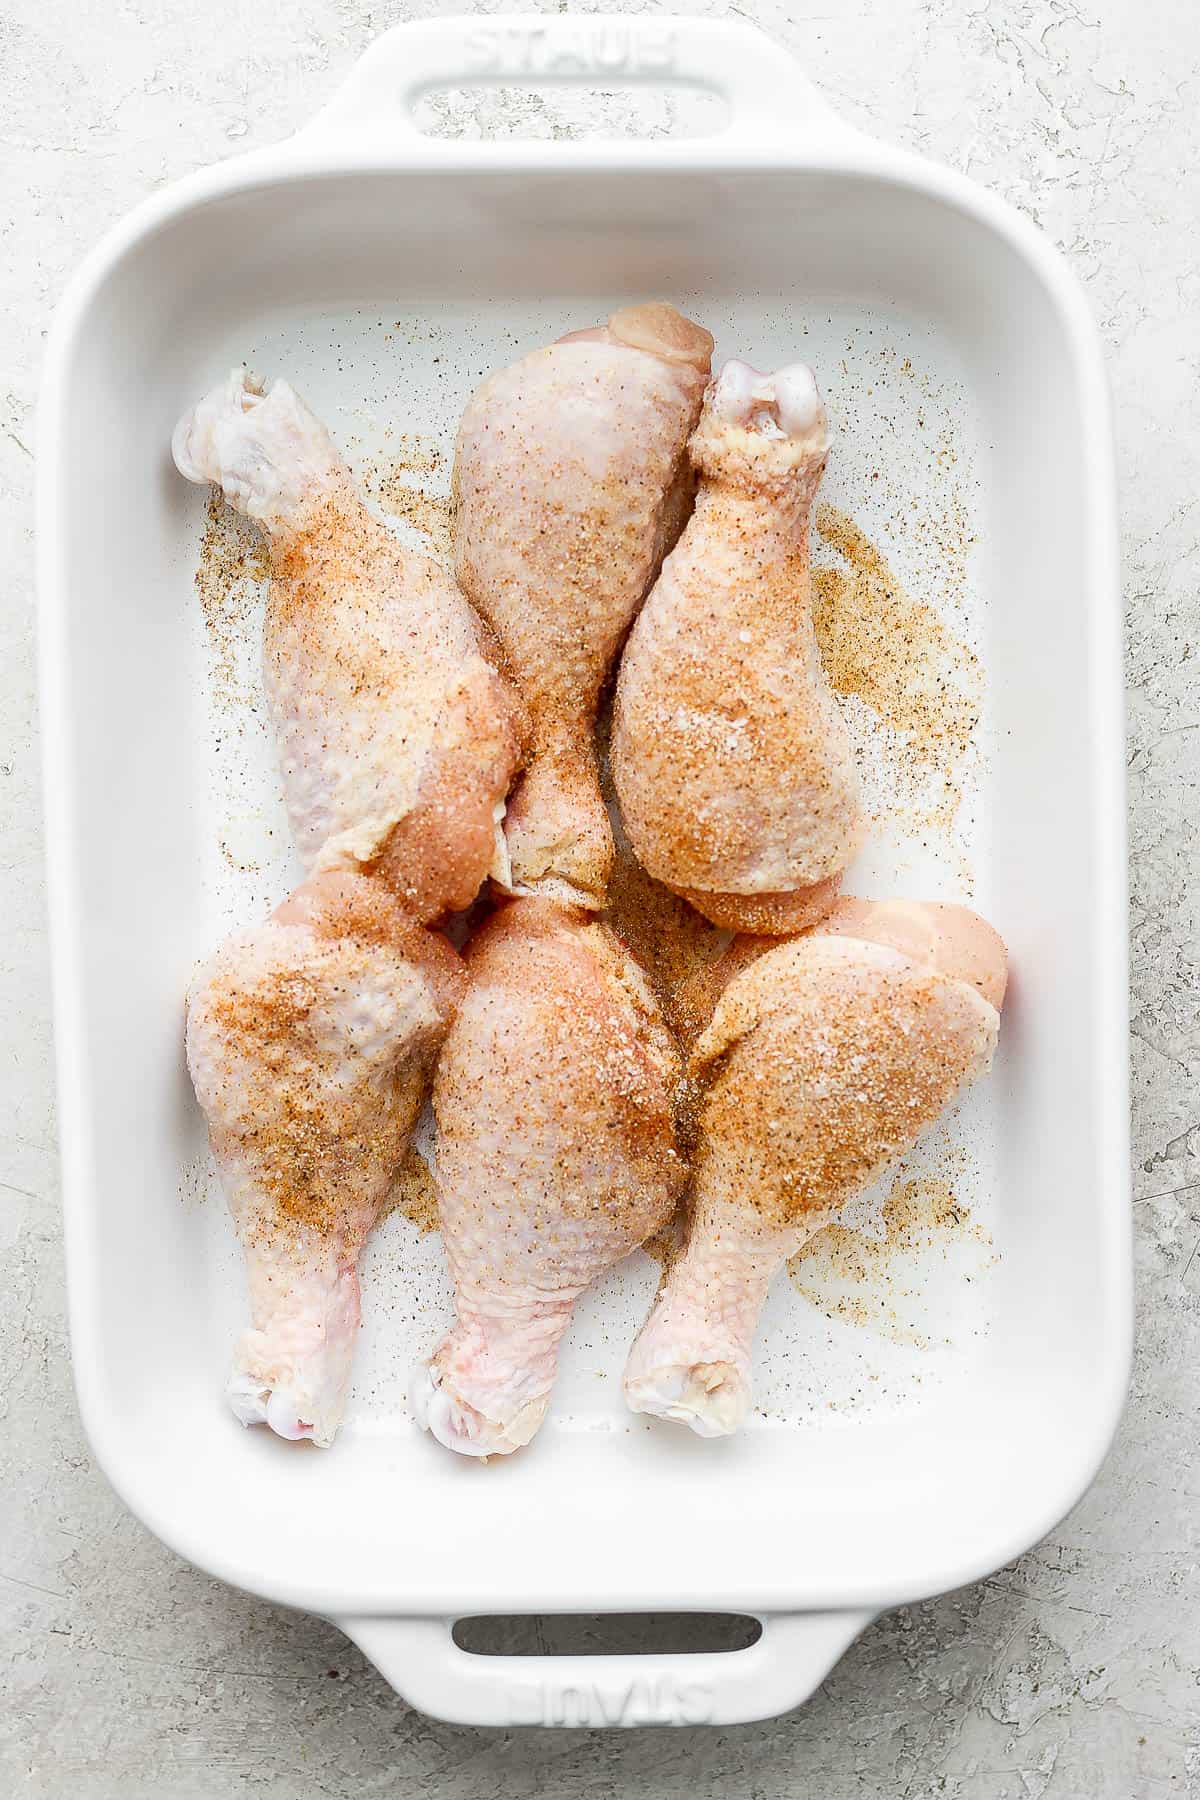 Raw chicken legs rubbed down in olive oil and then sprinkled with the seasoning mixture.